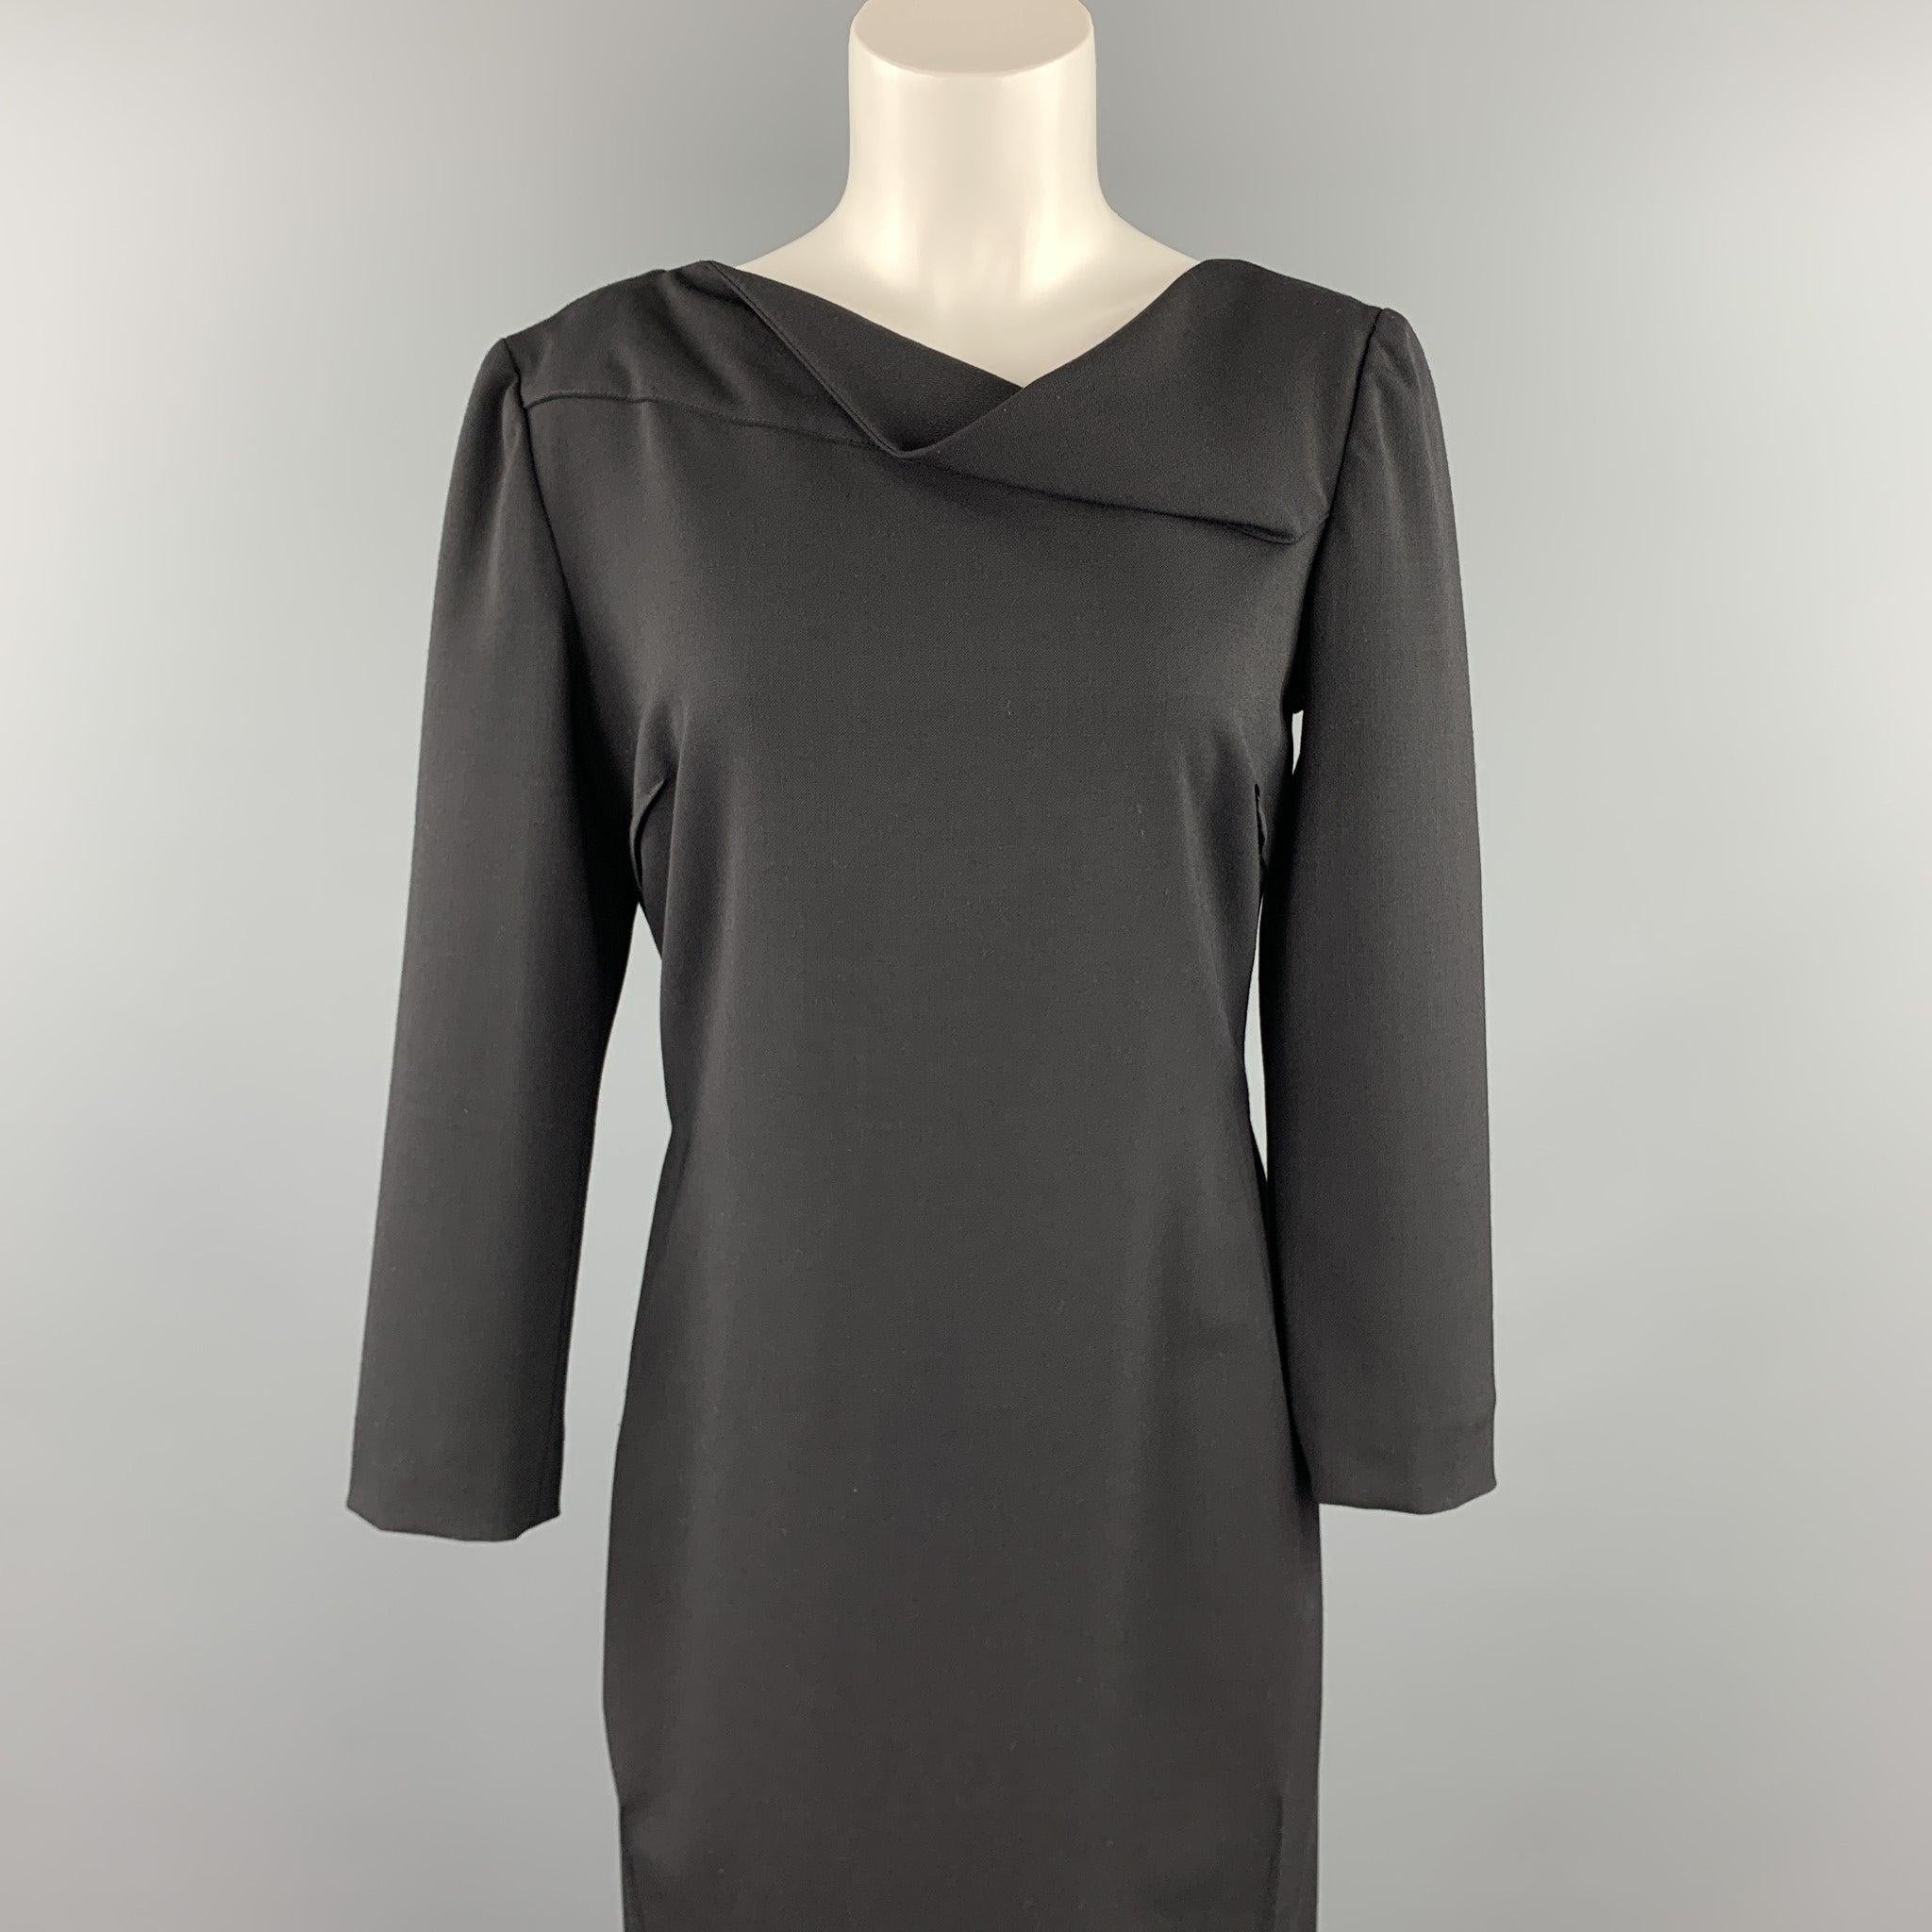 ARMANI COLLEZIONI dress comes in a black wool blend featuring a shift style, 3/4 sleeves, pleated details, and a back zip up closure. Made in Romania.New With Tags. 

Marked:  8 

Measurements: 
 
Shoulder: 16 inches 
Bust: 34 inches 
Waist: 32